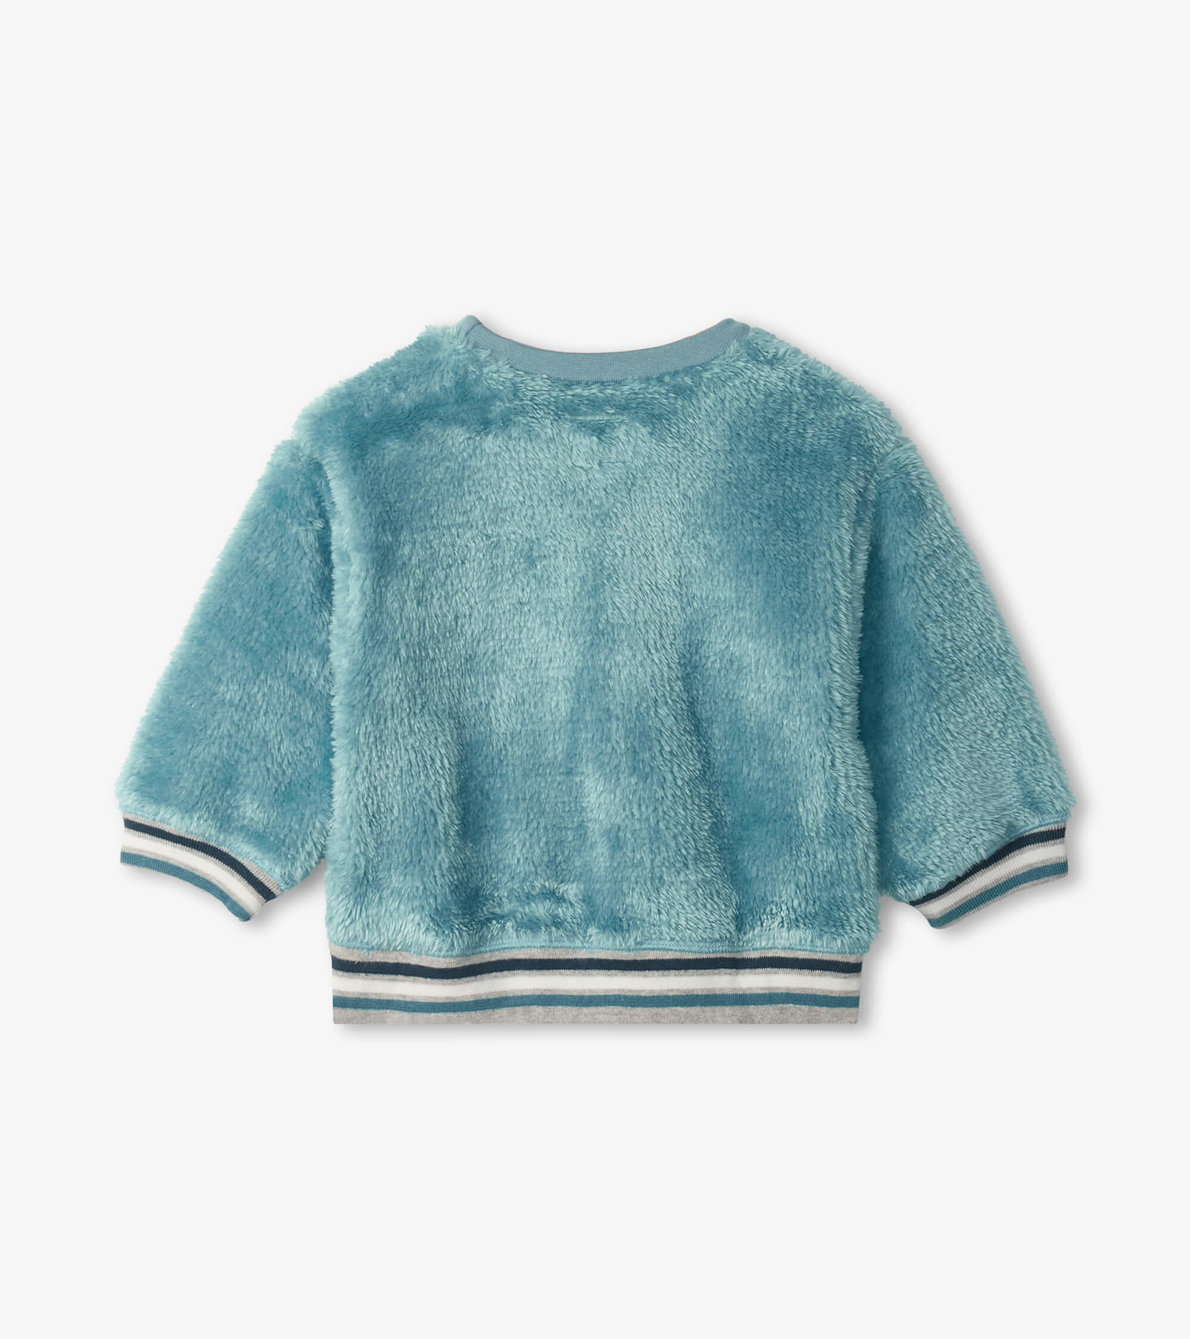 View larger image of Winter Cub Sherpa Fleece Baby Pullover